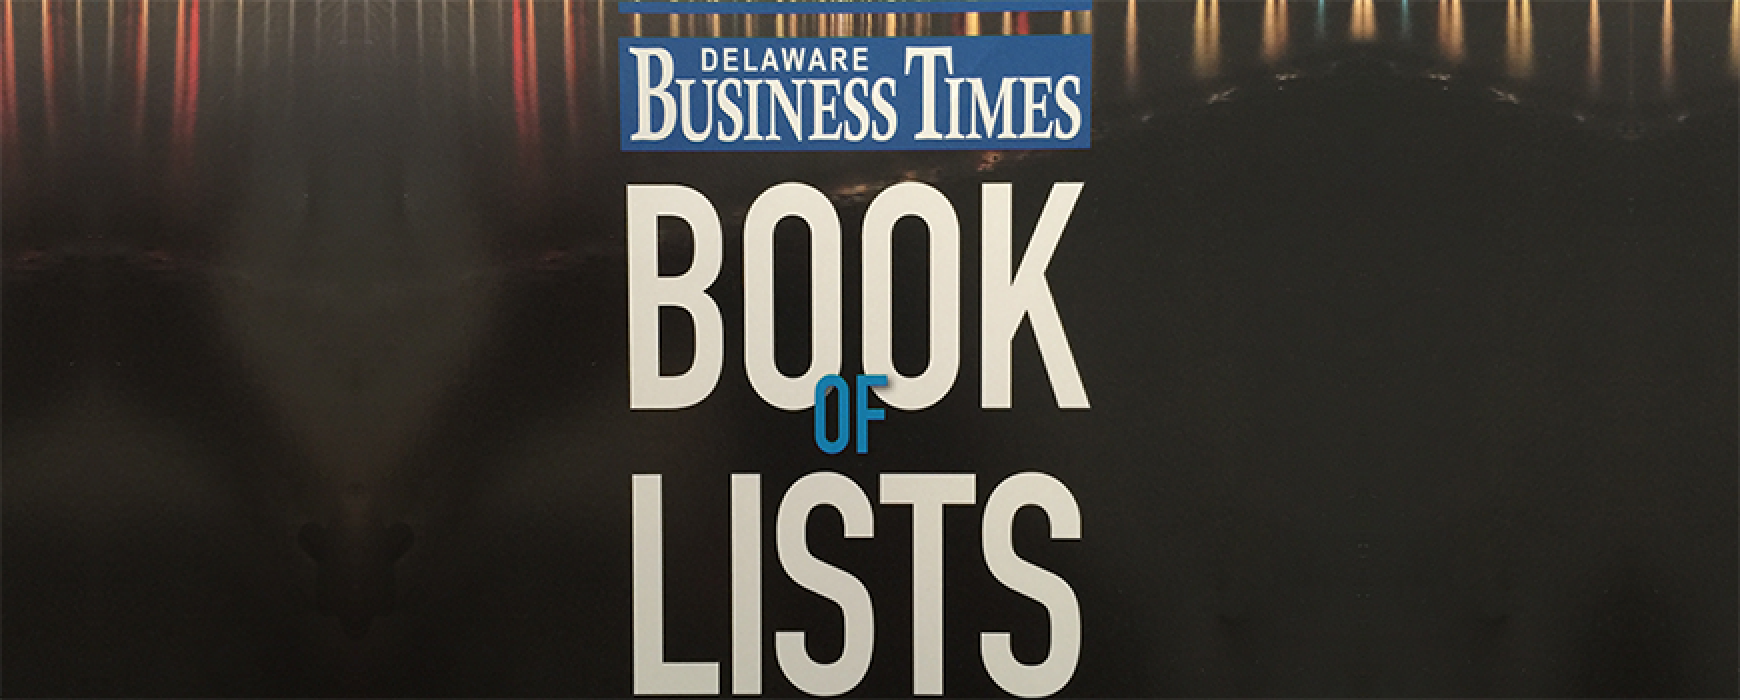 Corrado Construction Ranked 8th in 2015 Book of Lists